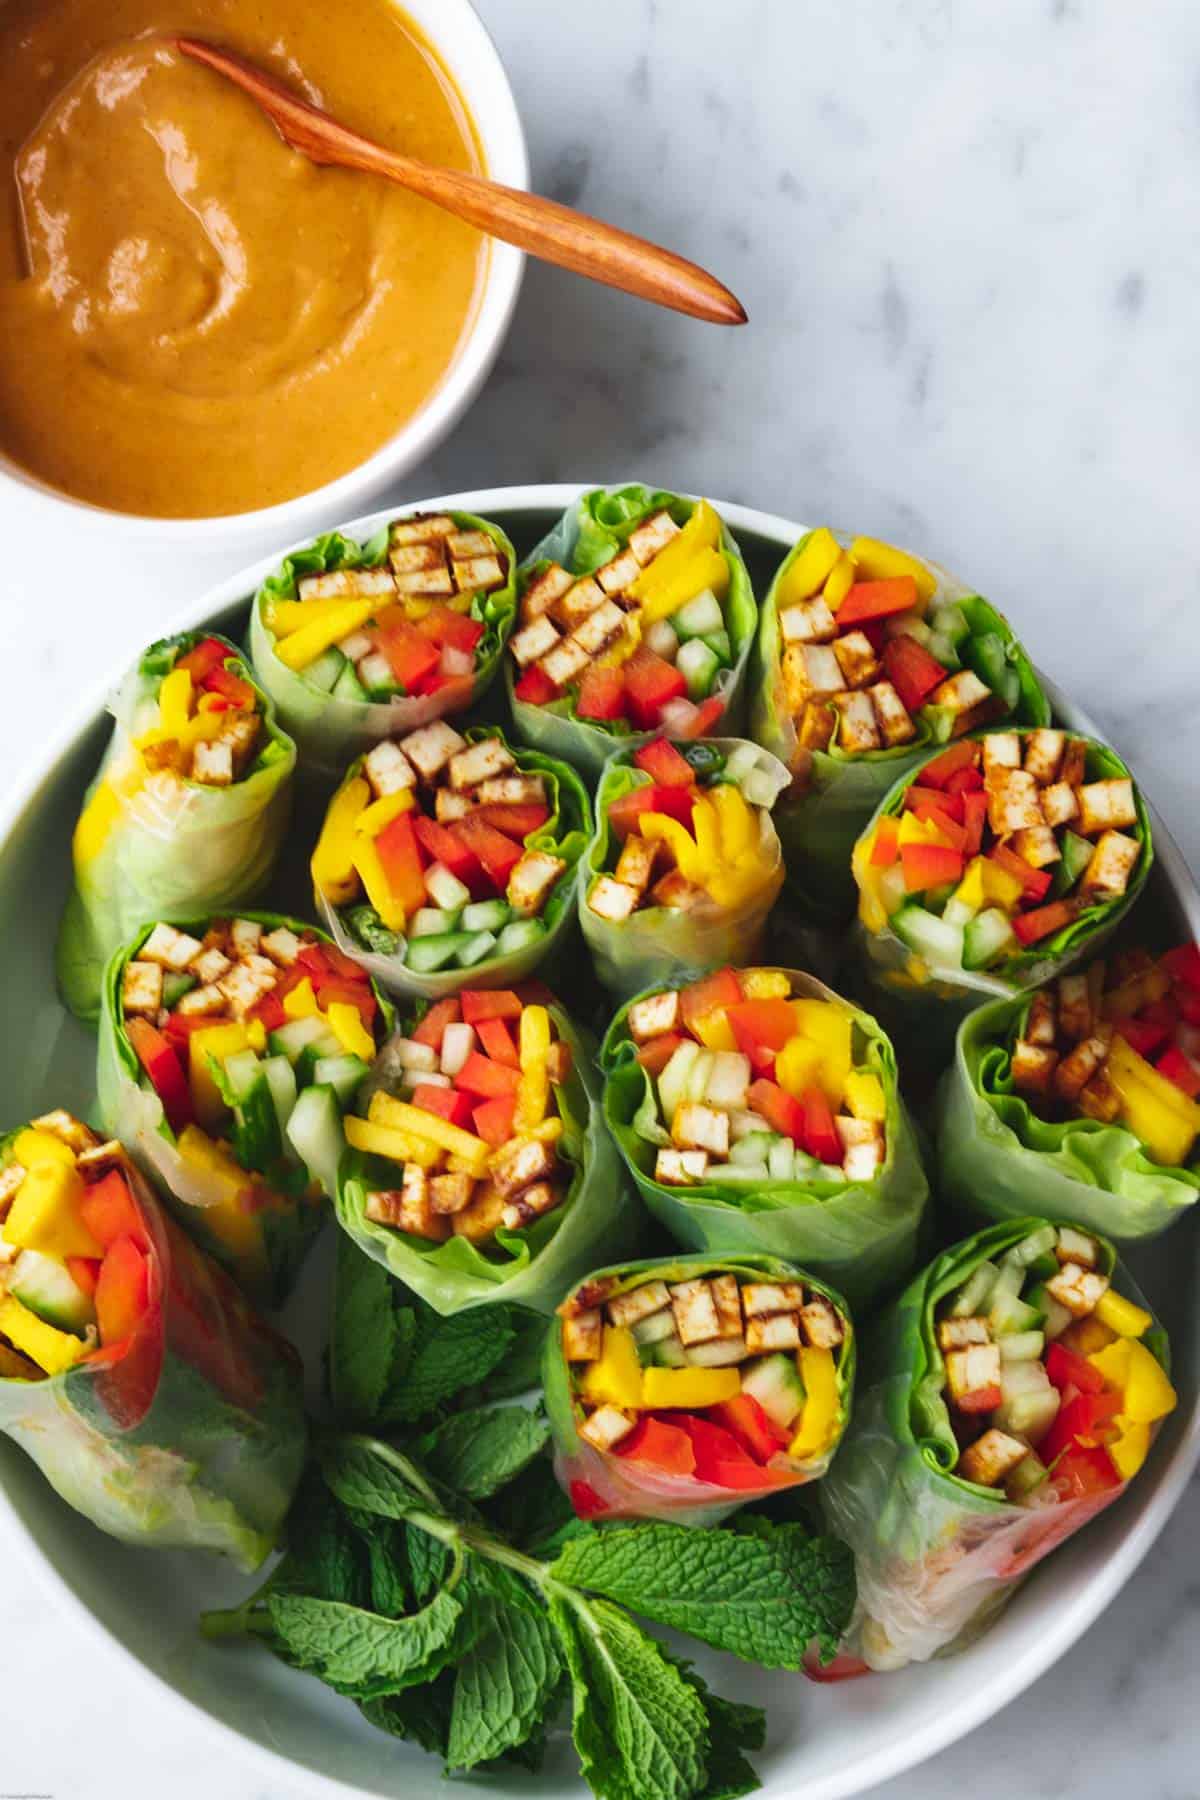 7 summer rolls cut in half in a white bowl. Filled with tofu, mango, cucumber, red bell pepper, lettuce, and mint. Served with peanut dipping sauce.